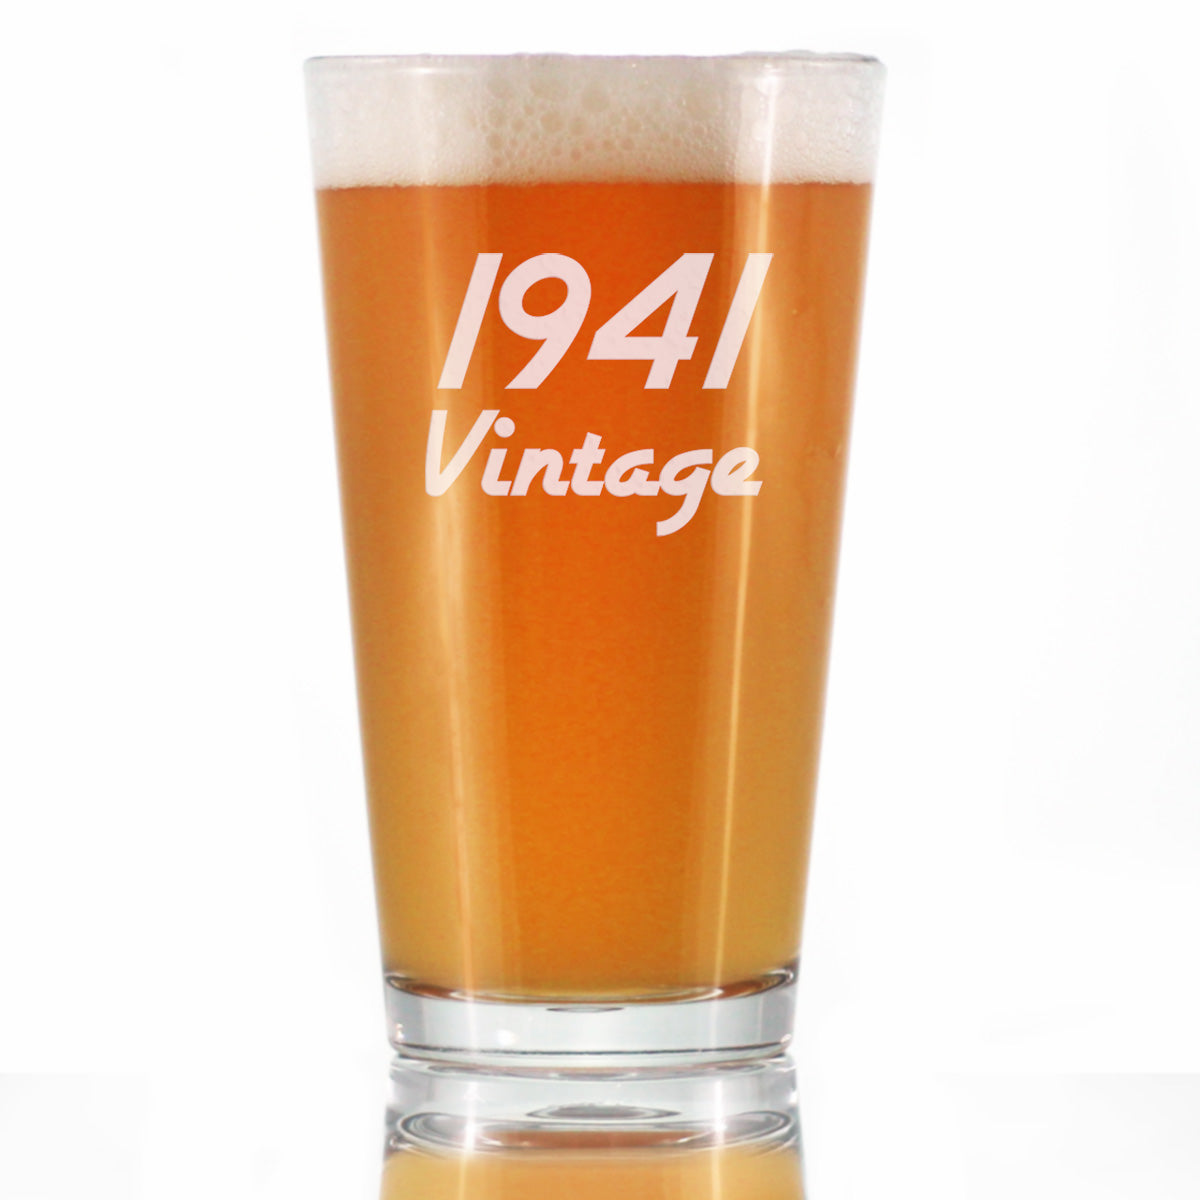 Vintage 1941 - Pint Glass for Beer - 83rd Birthday Gifts for Men or Women Turning 83 - Fun Bday Party Decor - 16 oz